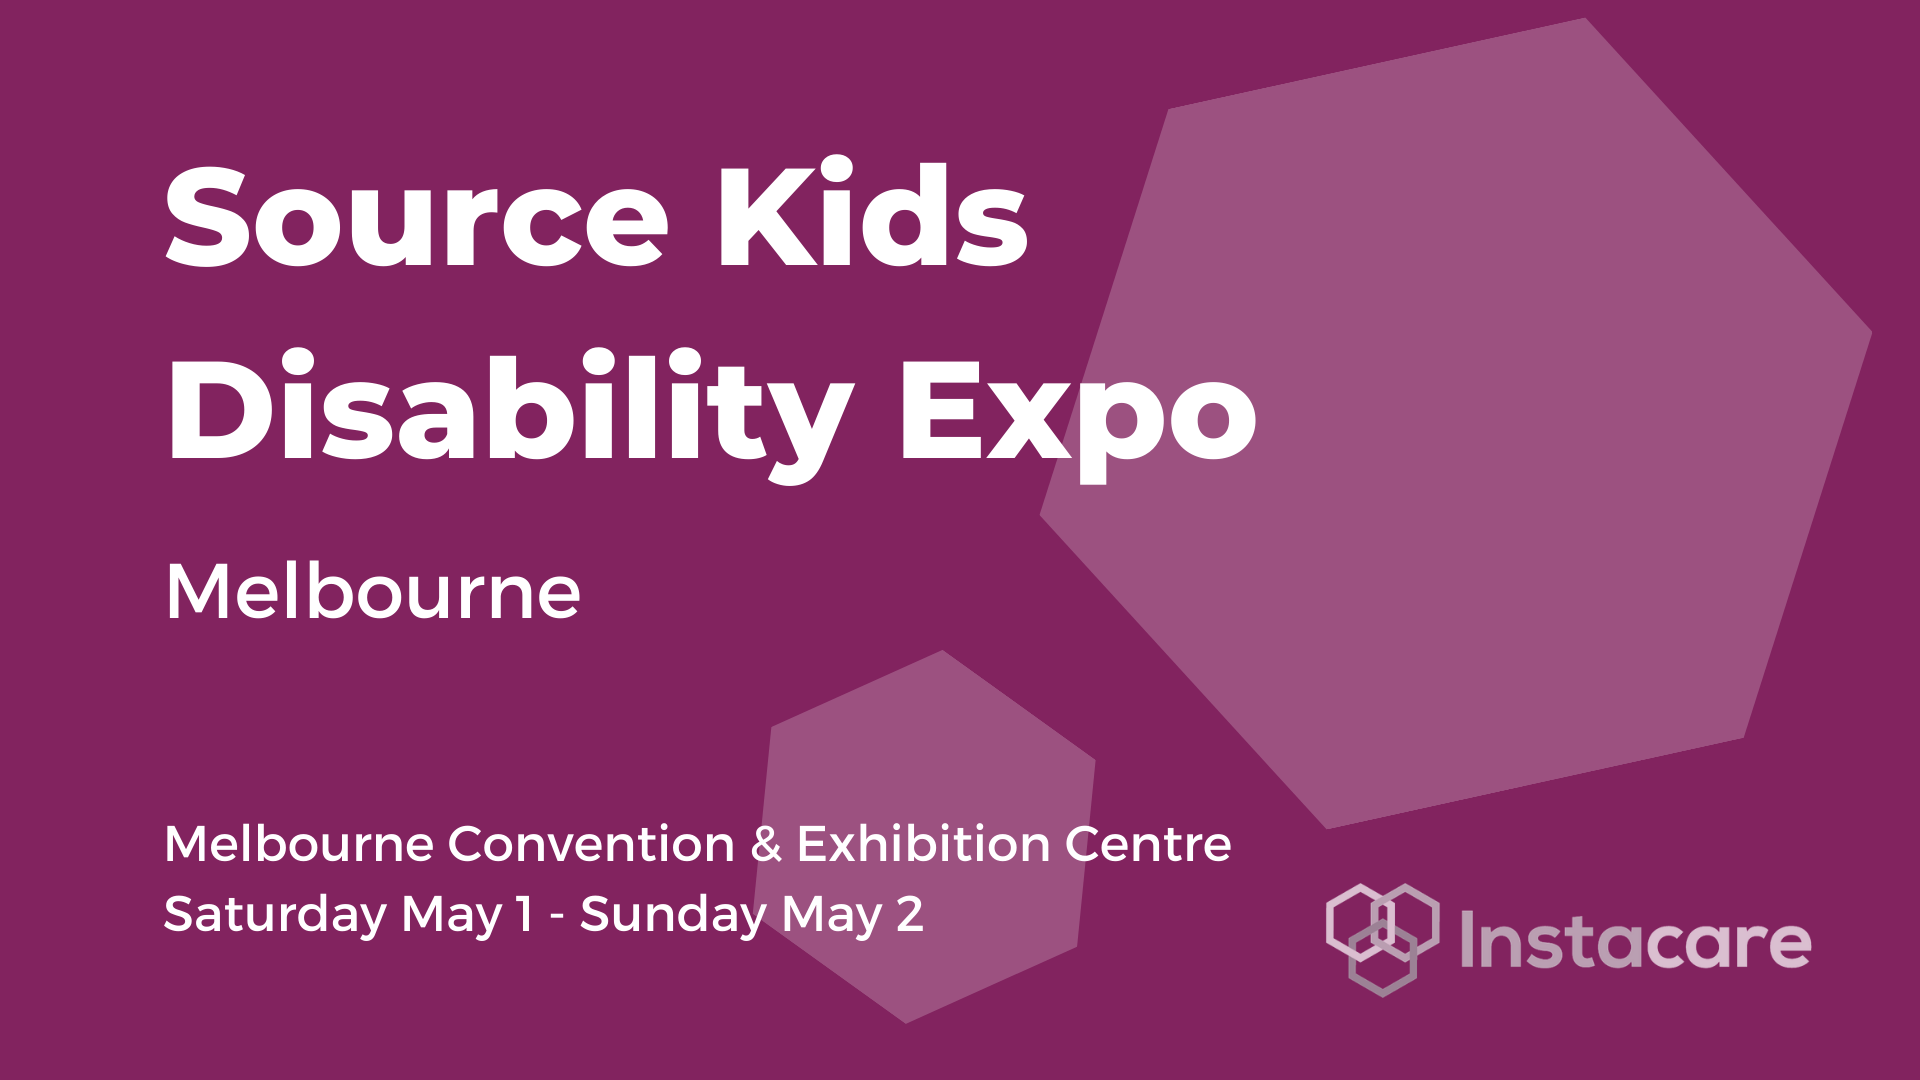 source kids disability expo melbourne